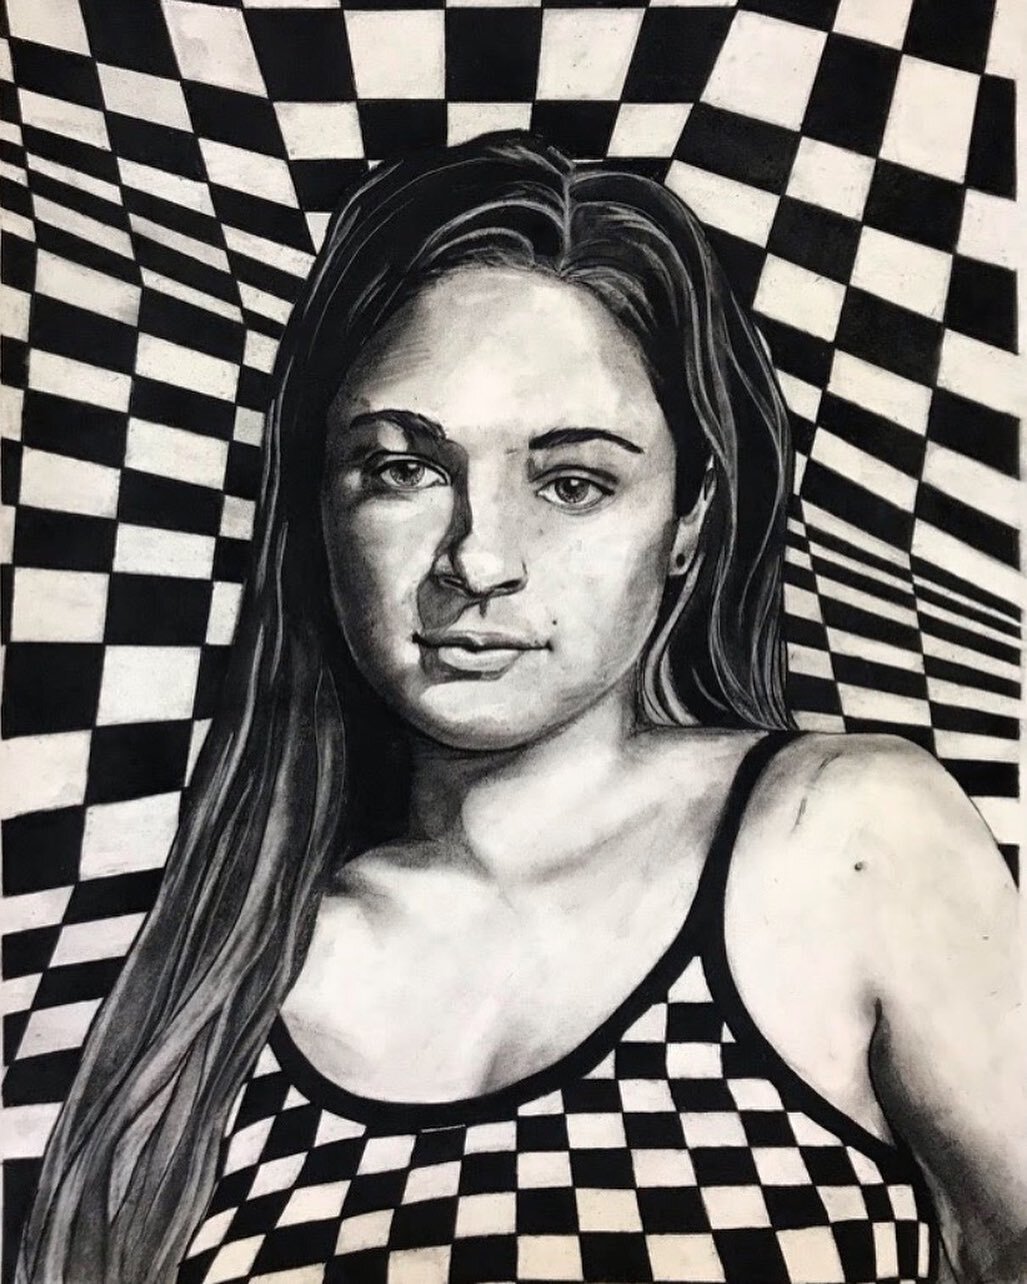 Astrid Looks Back.
.
Self portrait by @lilpaddington_  who &ldquo;[calls into question our perceptions and perspectives.]&rdquo; 👀👀🏁🏁
.
#charcoal #rivesbfk #checkerpattern #artstudent #artclass #drawingclass #portraitdrawing #selfie #artoninstagr